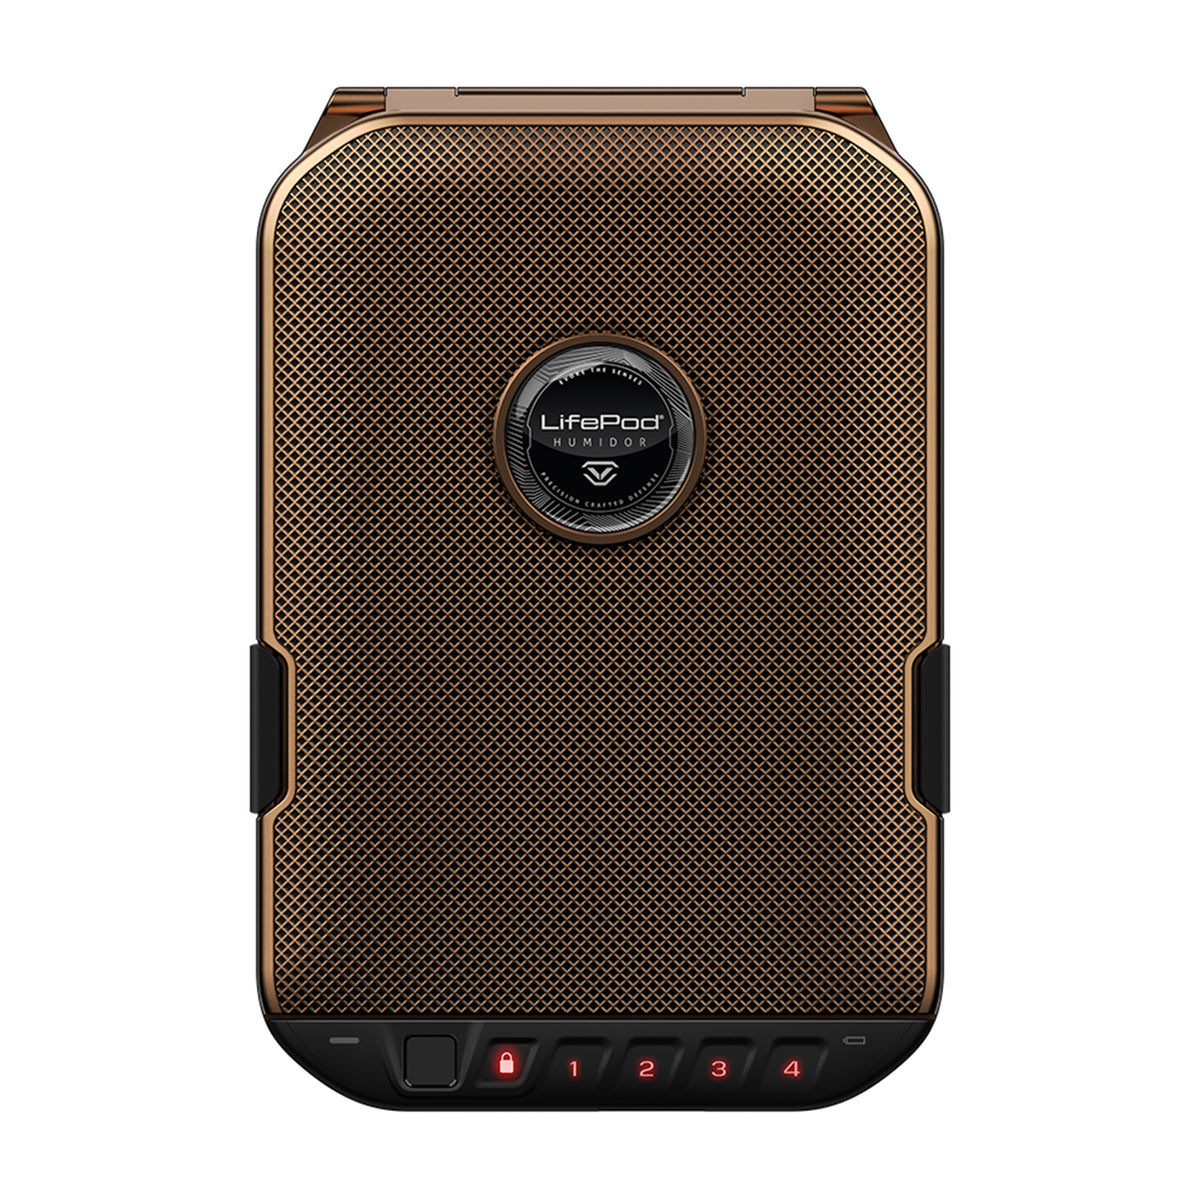 Vaultek - Weather Resistant LifePod 2.0 Humidor with Biometric Scanner, Bluetooth App, and Built-in Lock System